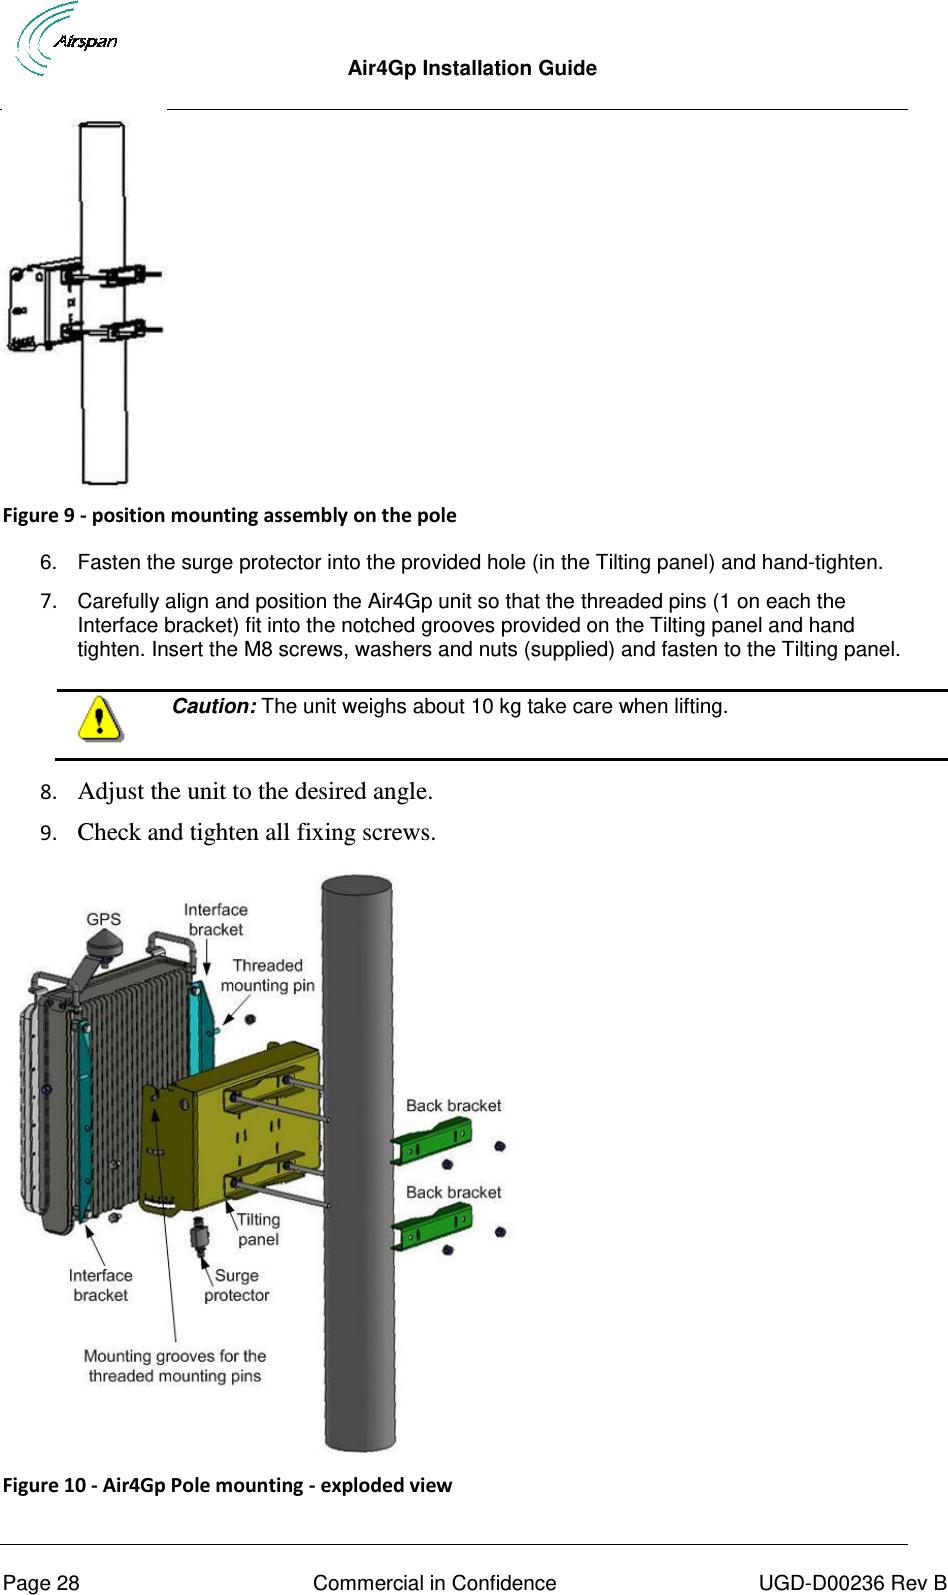  Air4Gp Installation Guide     Page 28  Commercial in Confidence  UGD-D00236 Rev B  Figure 9 - position mounting assembly on the pole  6.  Fasten the surge protector into the provided hole (in the Tilting panel) and hand-tighten. 7. Carefully align and position the Air4Gp unit so that the threaded pins (1 on each the Interface bracket) fit into the notched grooves provided on the Tilting panel and hand tighten. Insert the M8 screws, washers and nuts (supplied) and fasten to the Tilting panel.   Caution: The unit weighs about 10 kg take care when lifting.  8. Adjust the unit to the desired angle. 9. Check and tighten all fixing screws.  Figure 10 - Air4Gp Pole mounting - exploded view 